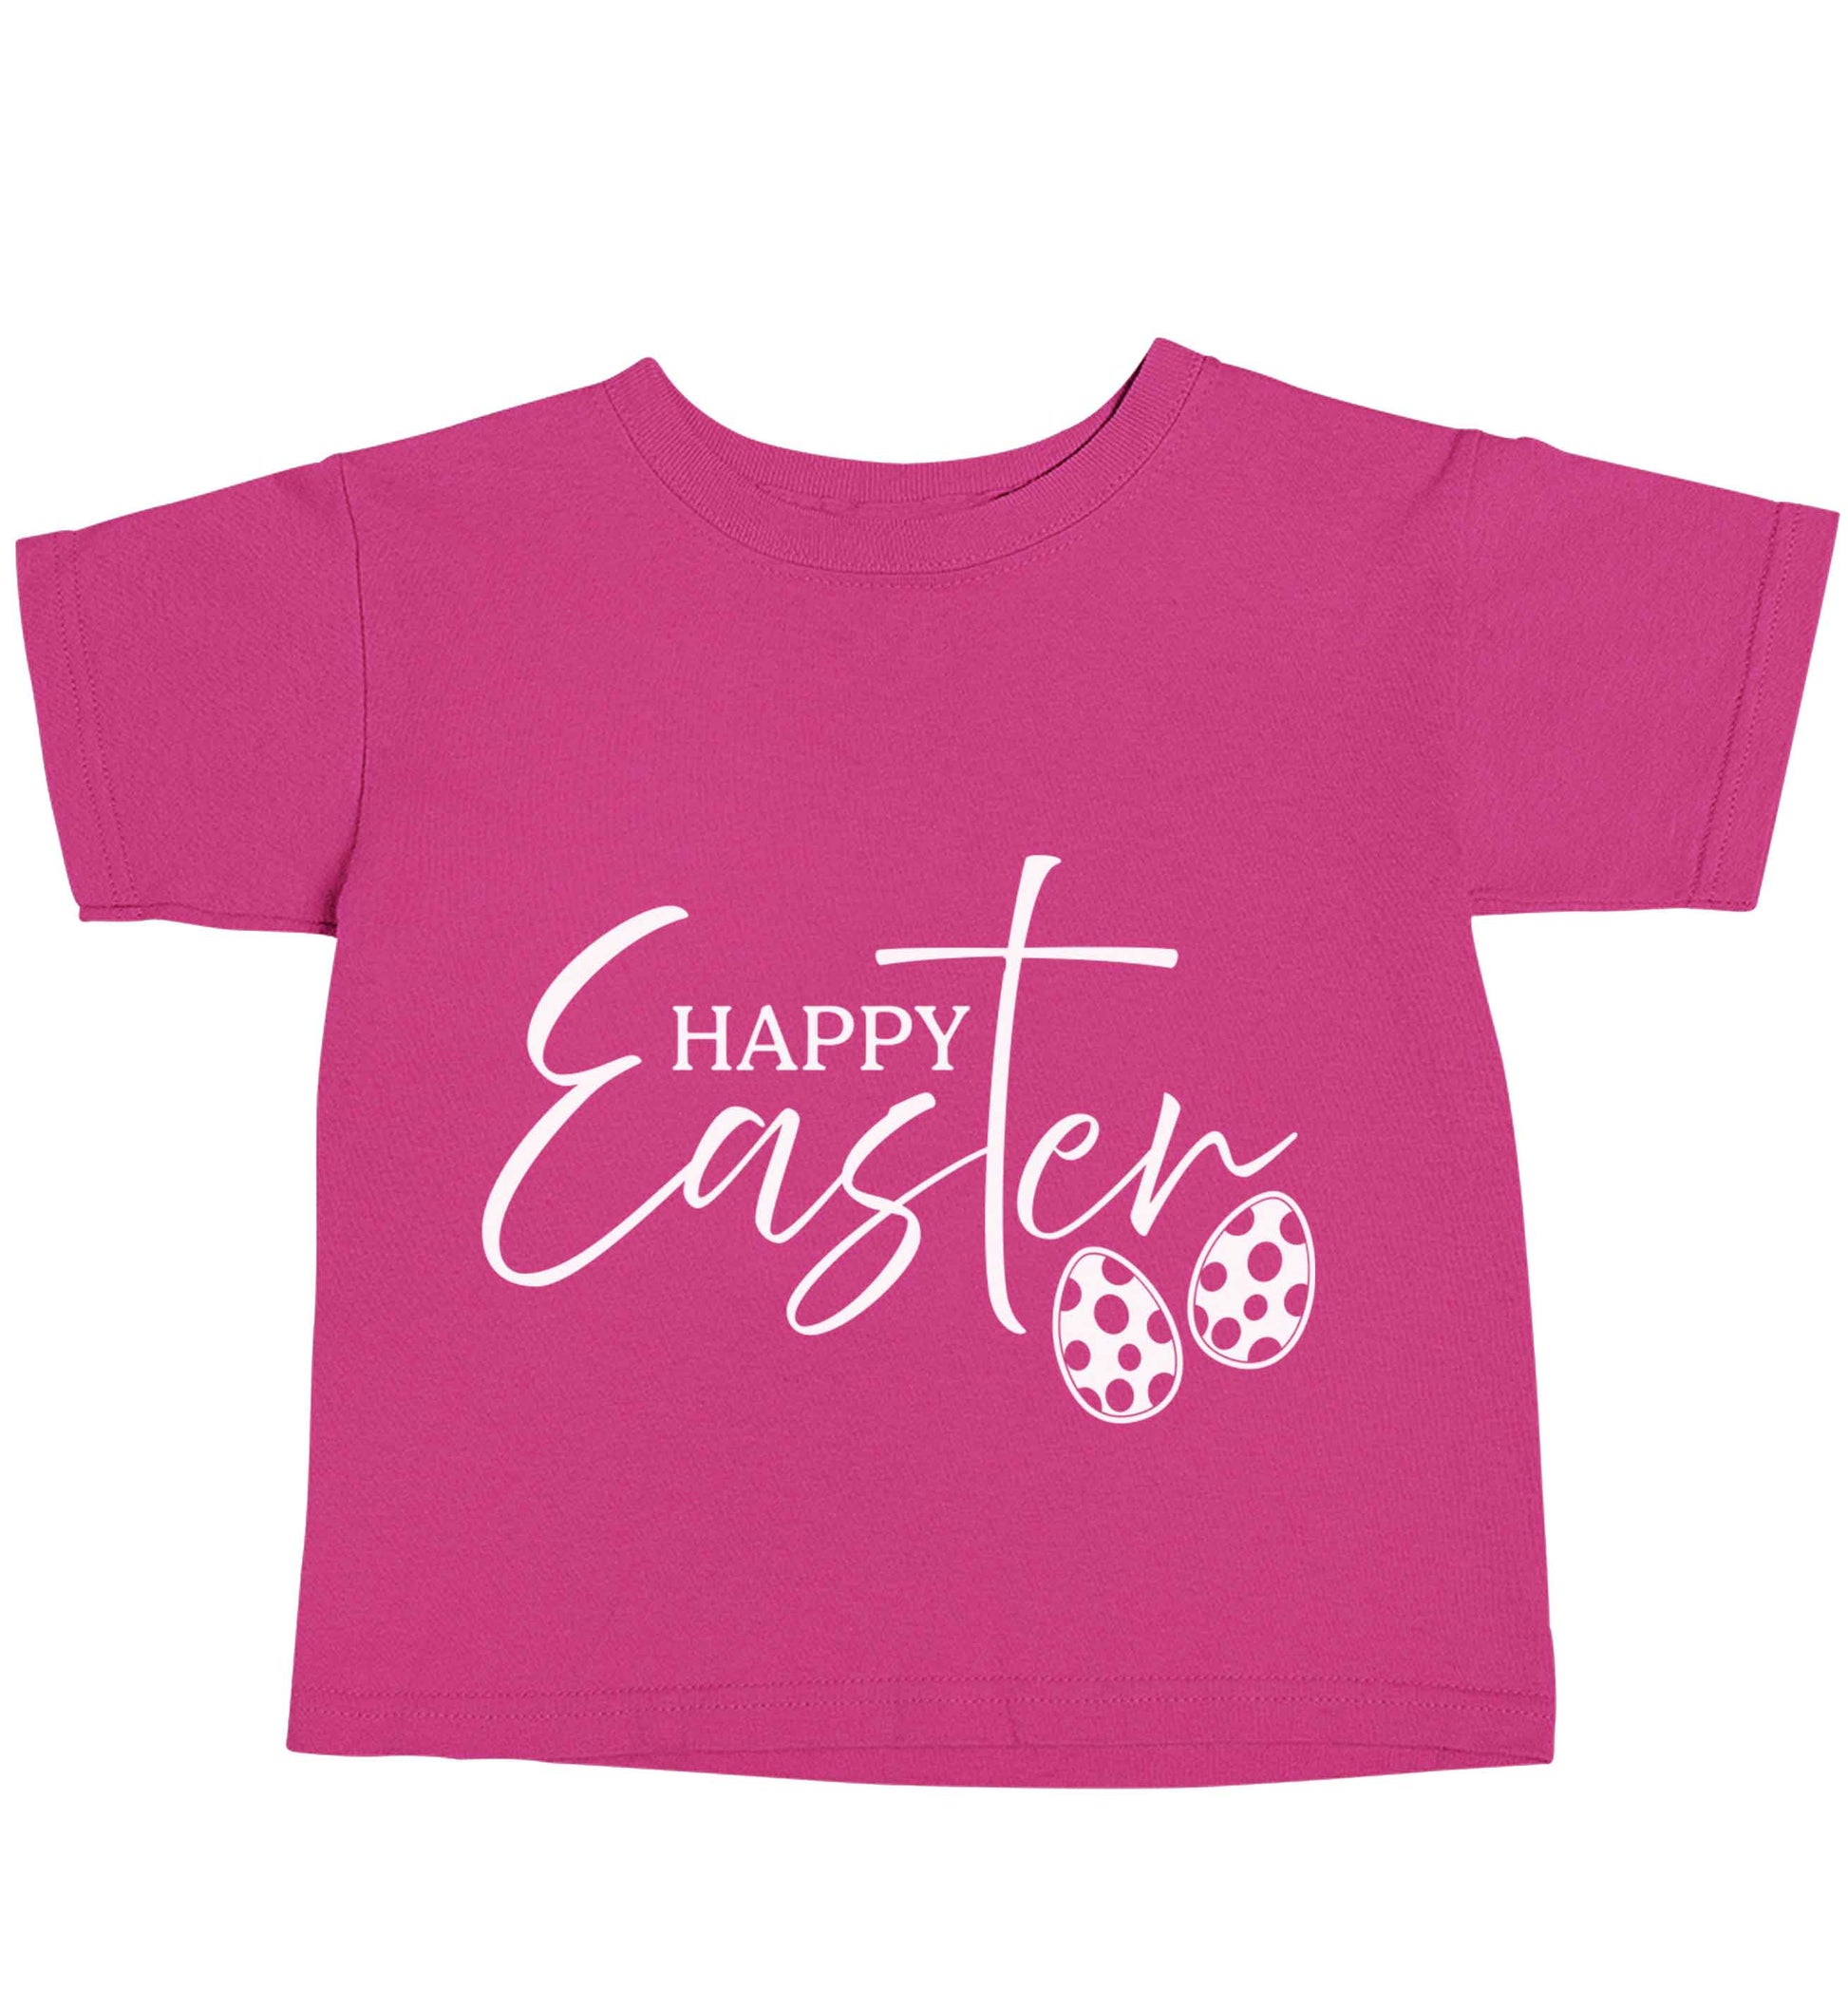 Happy Easter pink baby toddler Tshirt 2 Years